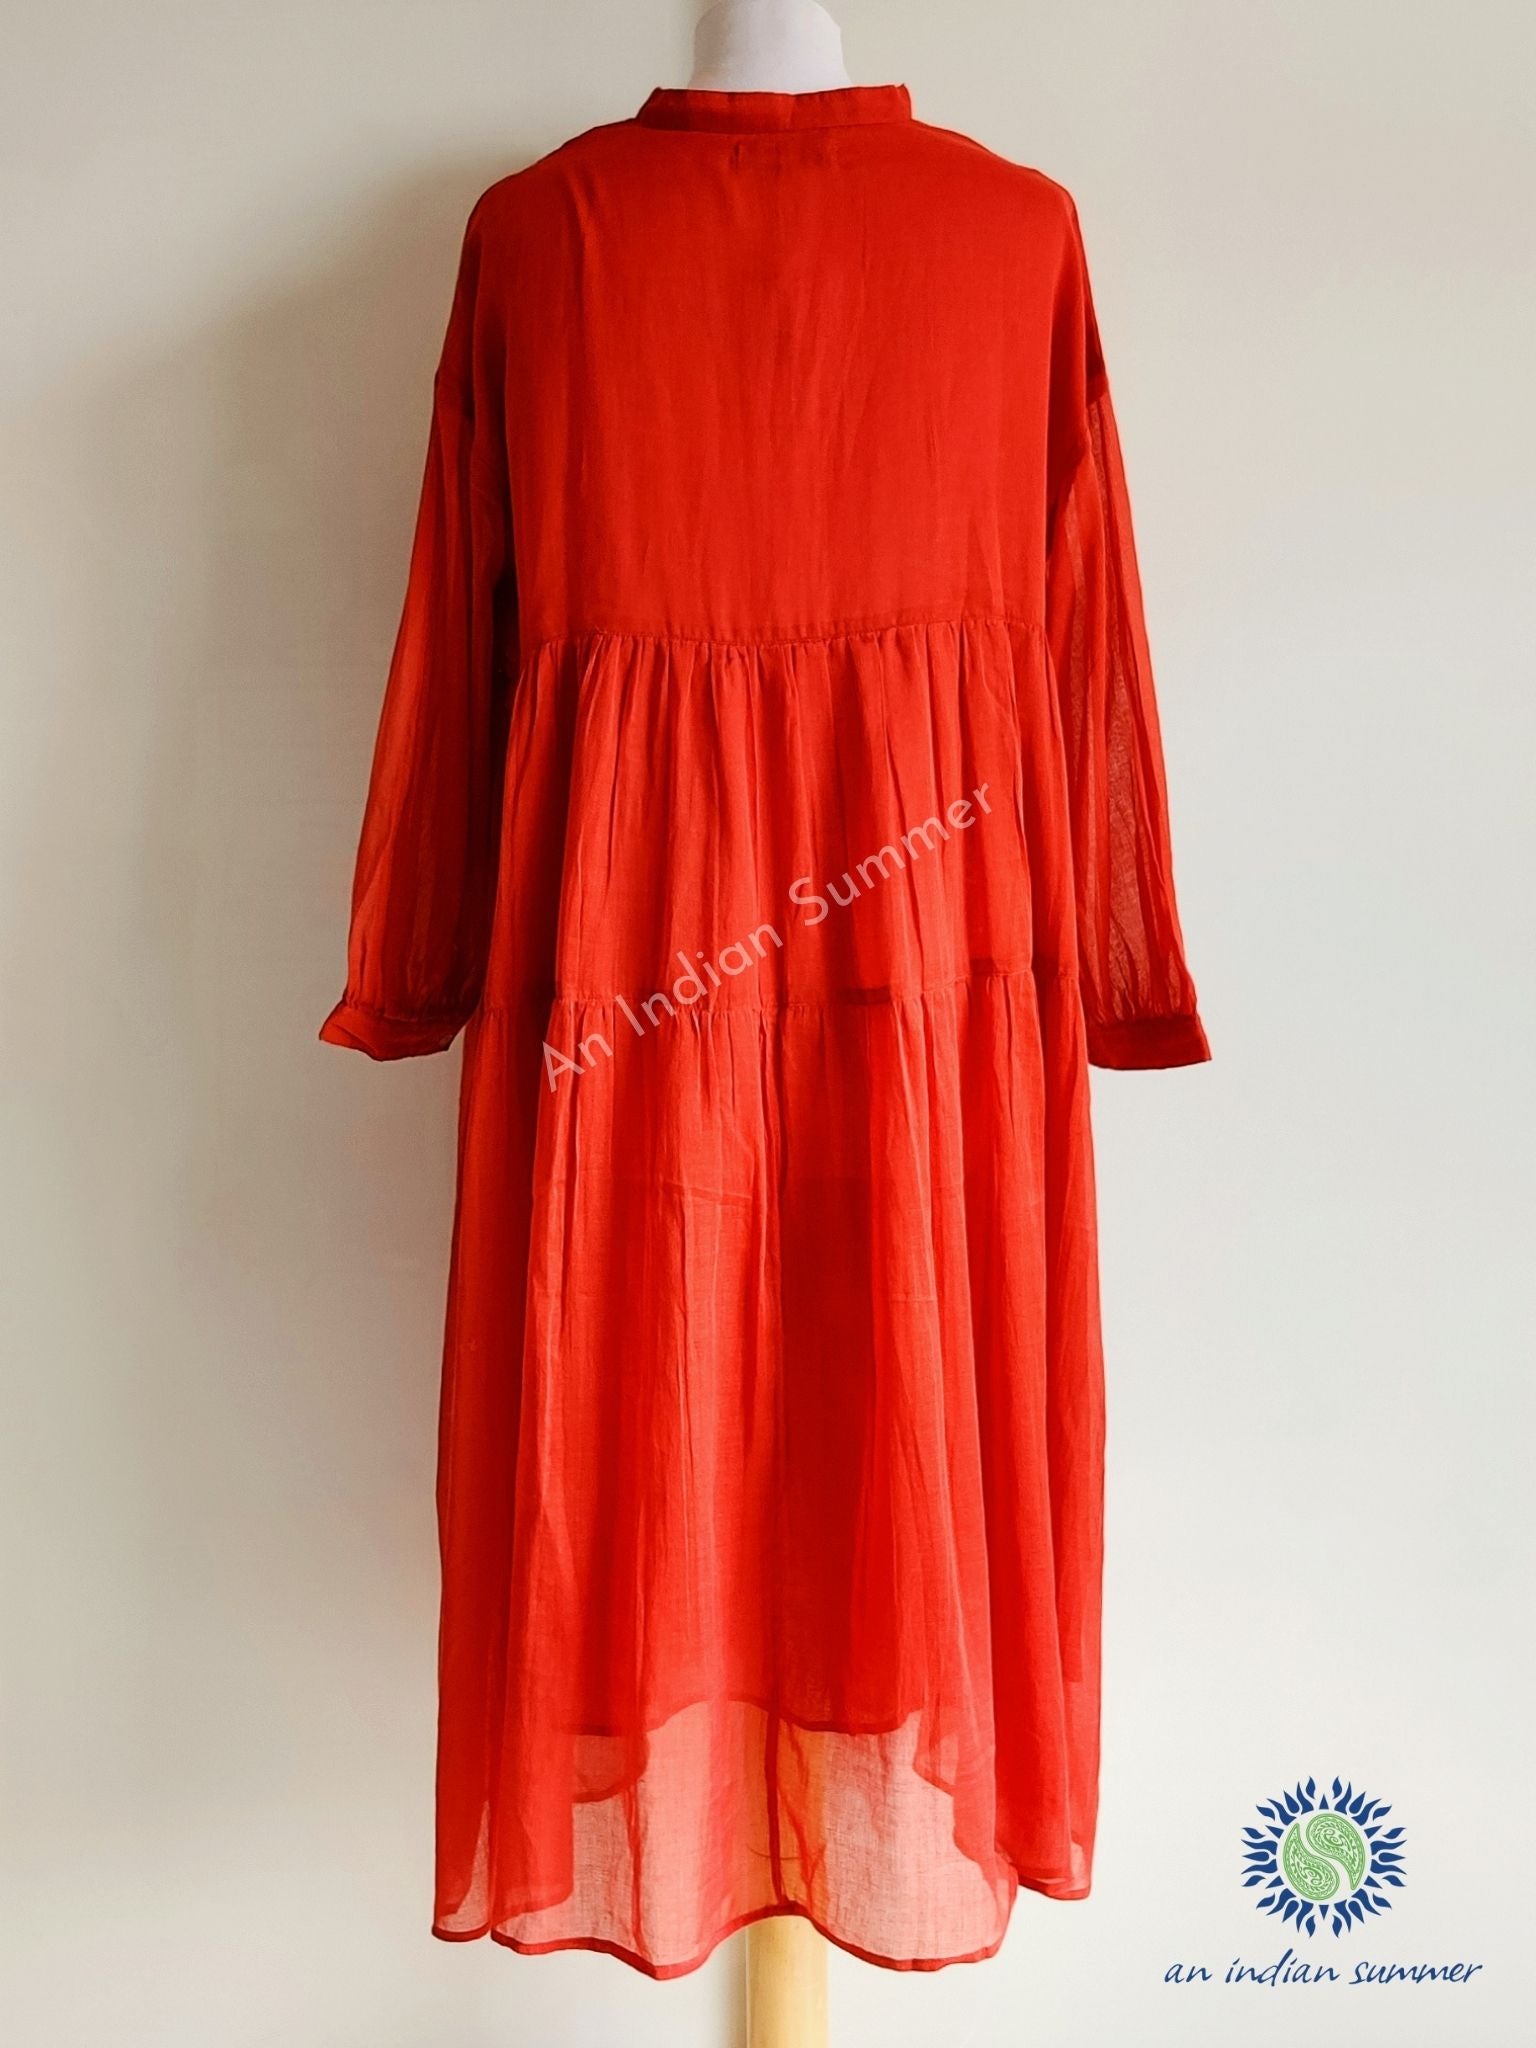 Burnt Orange | Nitya Dress | Plain Cotton Dress Self Lined with Pockets | Cotton Voile | An Indian Summer | Seasonless Timeless Sustainable Ethical Authentic Artisan Conscious Clothing Lifestyle Brand